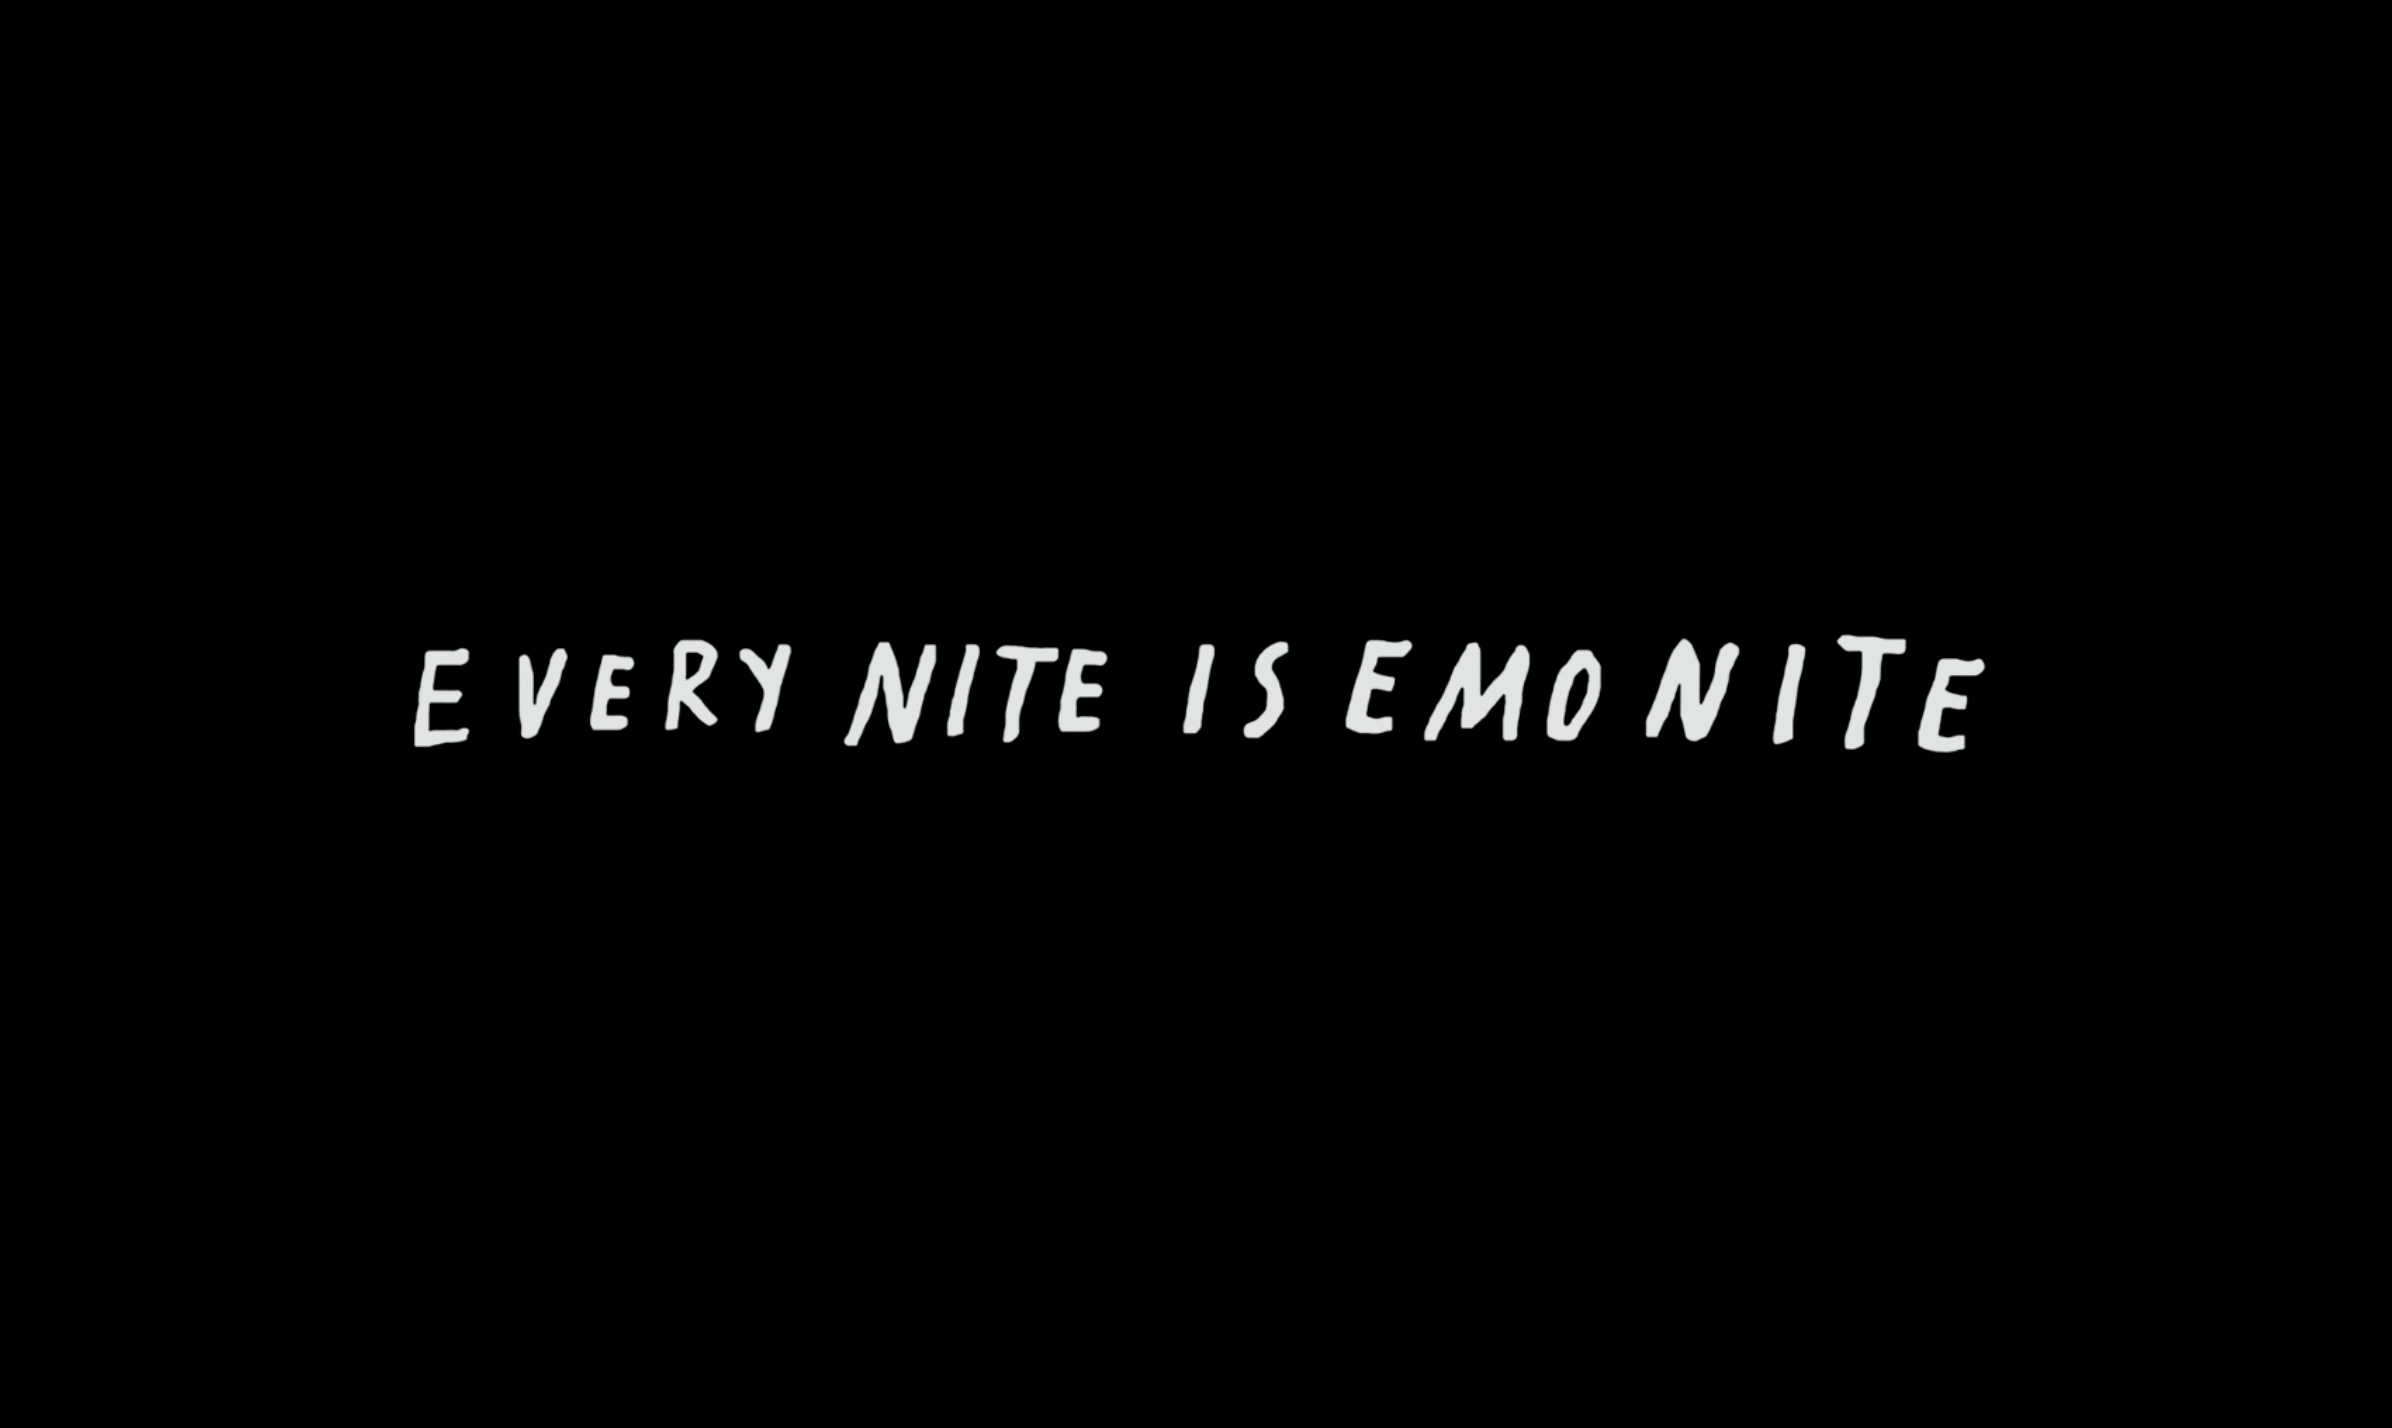 White text that says "every nite is emo nite"